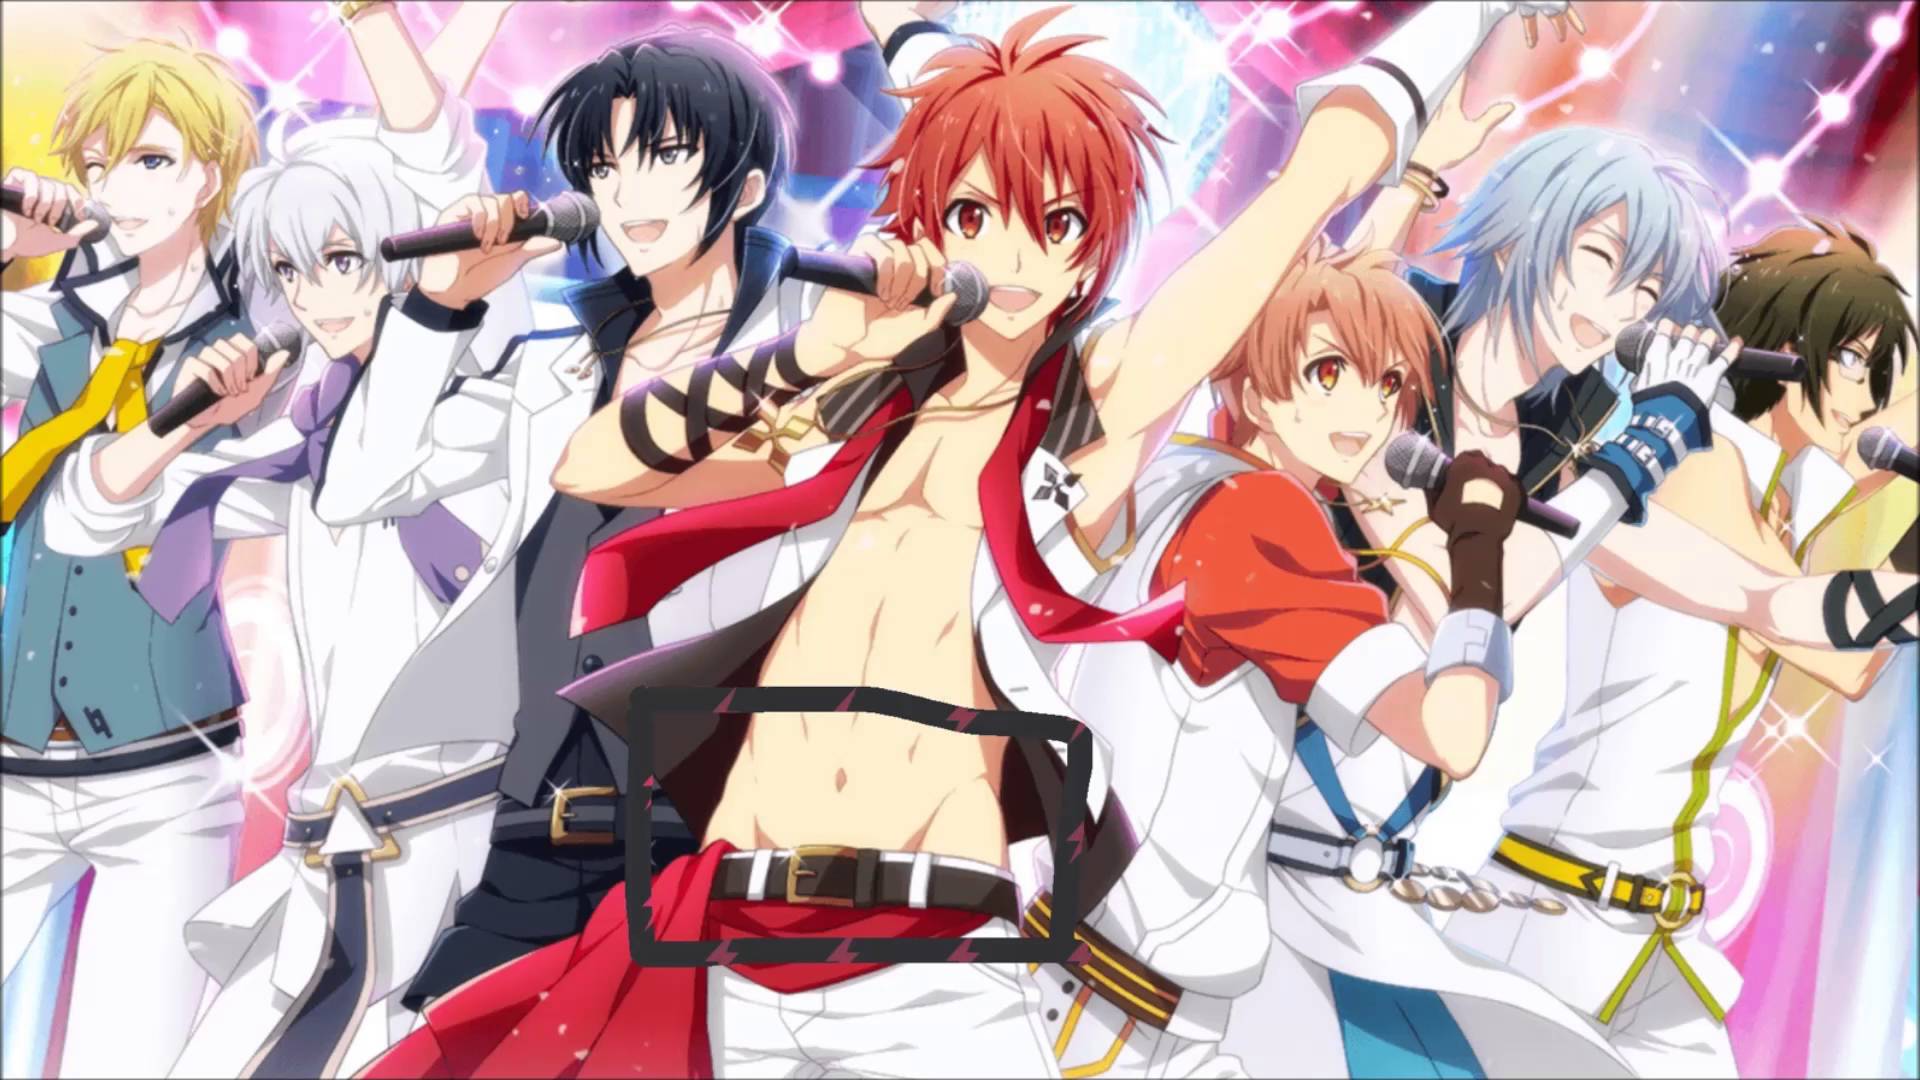 These anime idol boys are ready to rock!